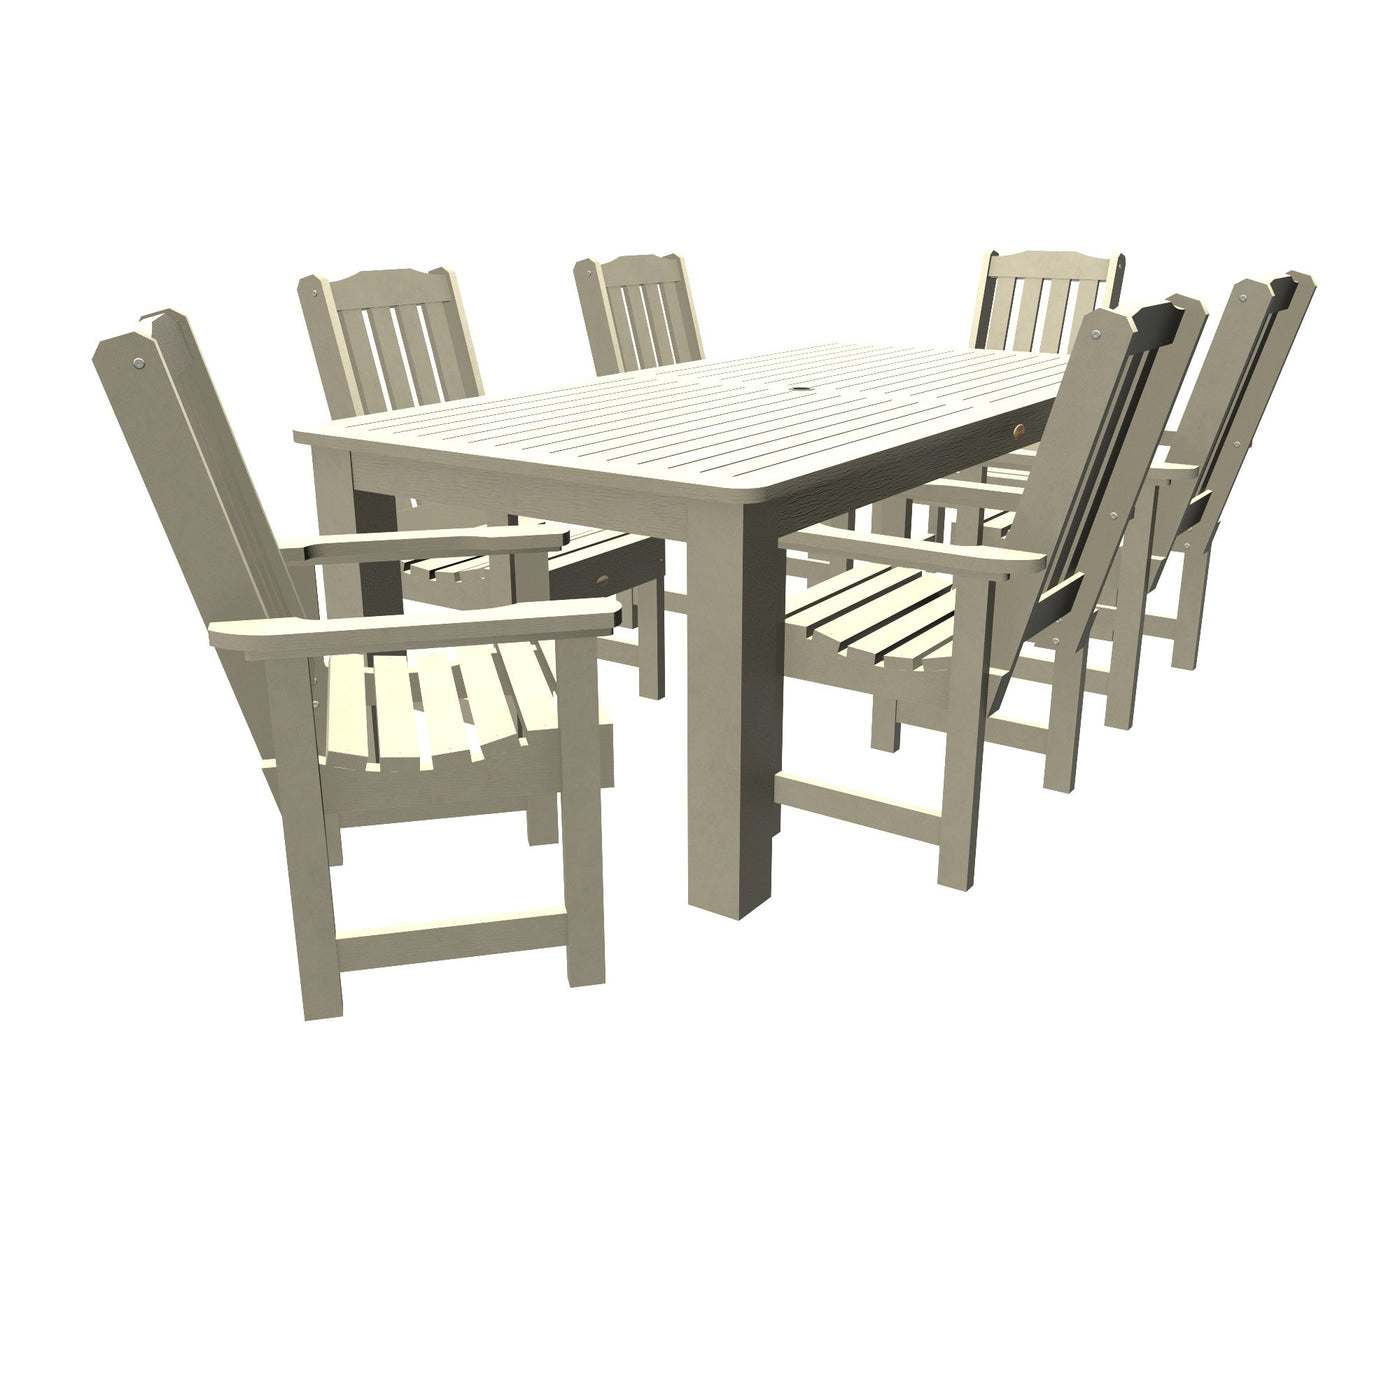 Lehigh 7pc Rectangular Outdoor Dining Set 42in x 84in - Dining Height Dining Highwood USA Whitewash 